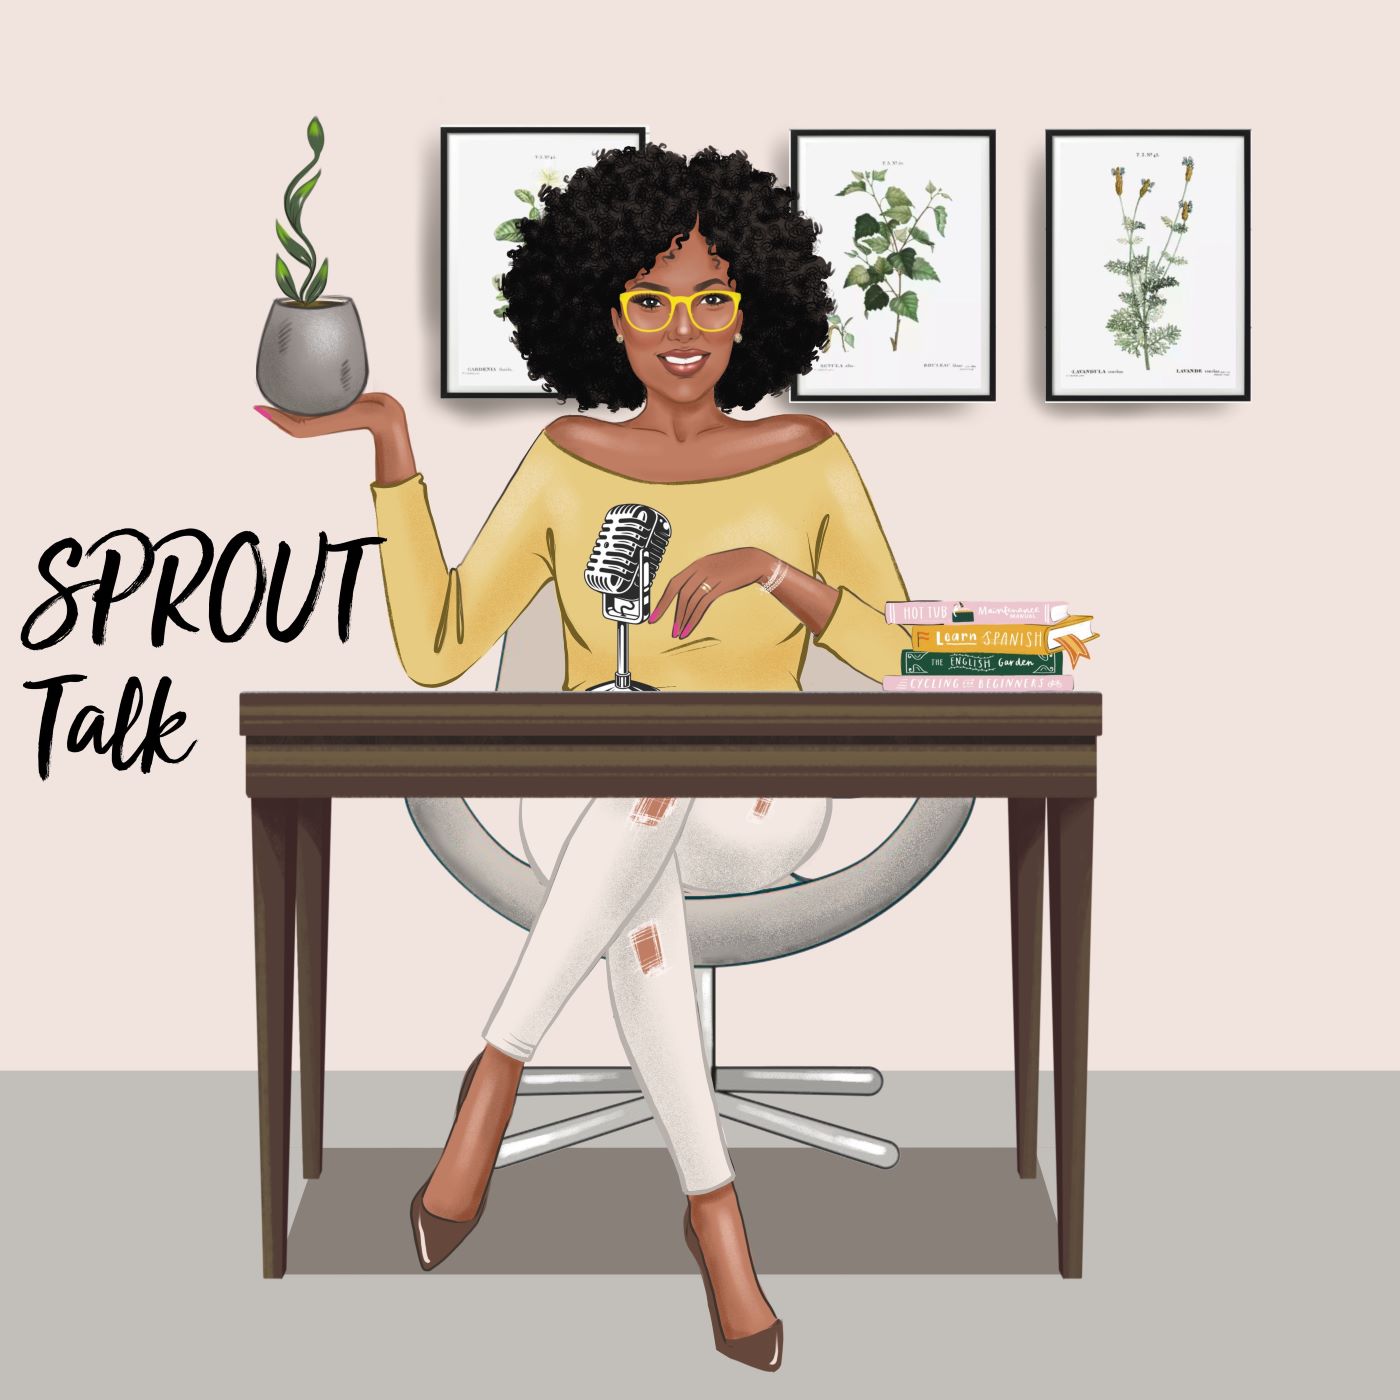 Sprout Talk